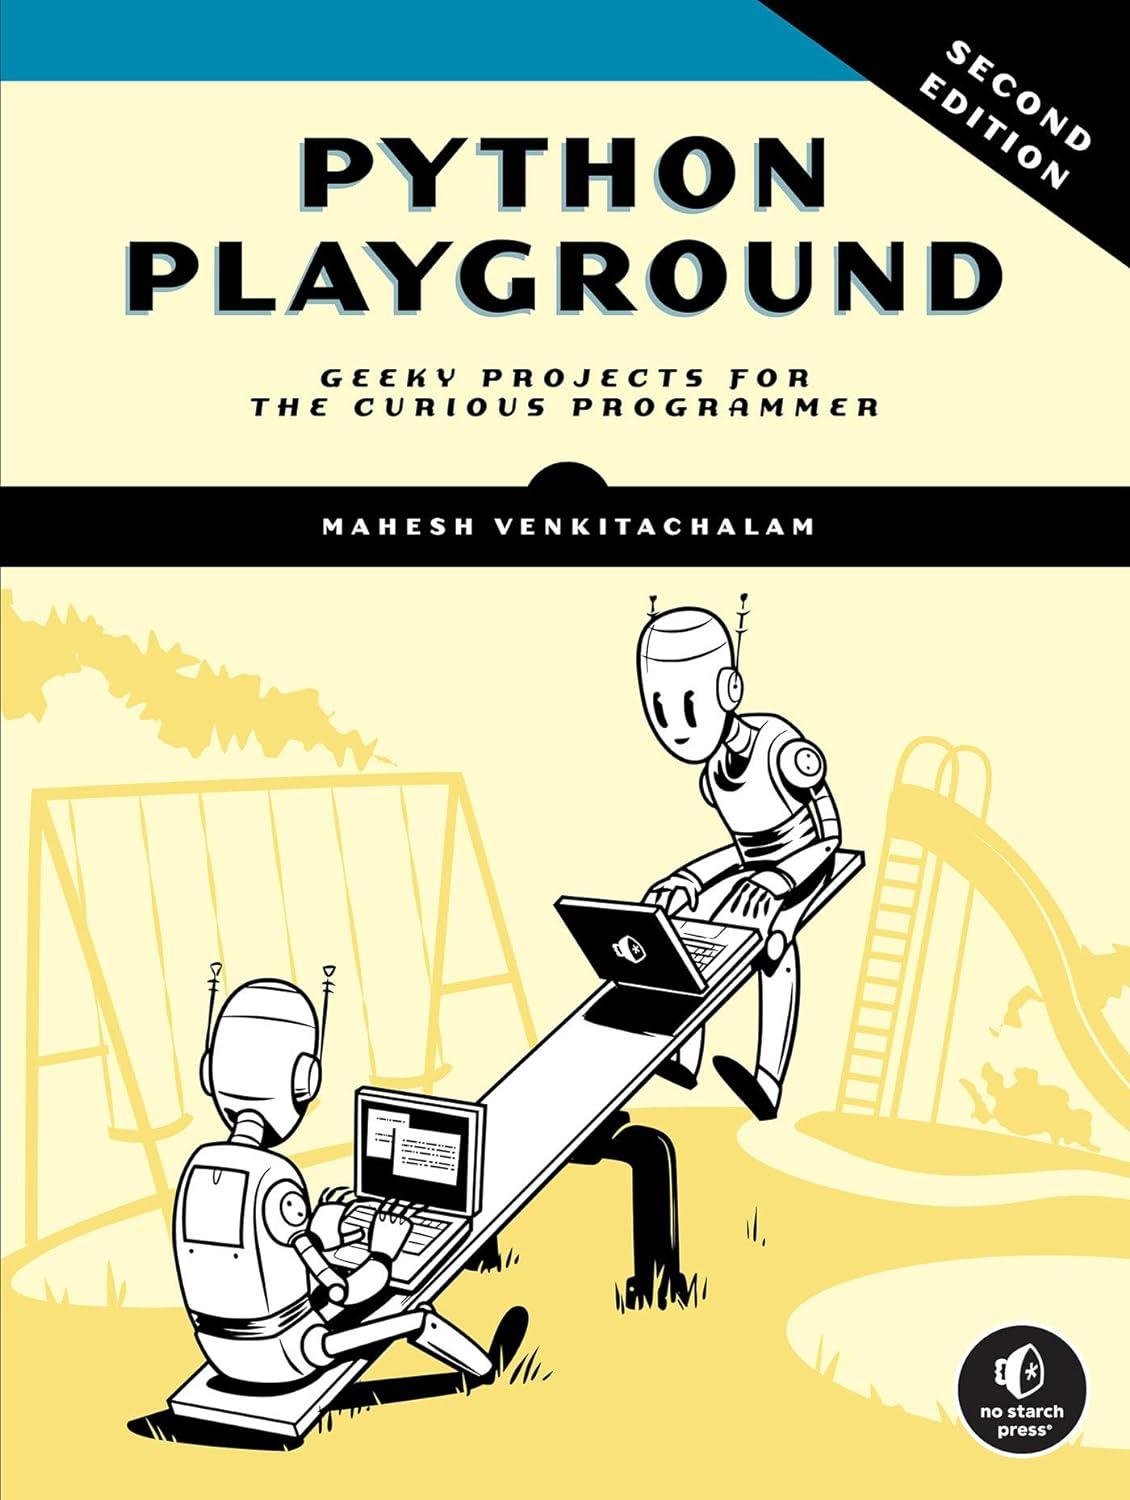 python playground geeky projects for the curious programmer 2nd edition mahesh venkitachalam 1718503040,